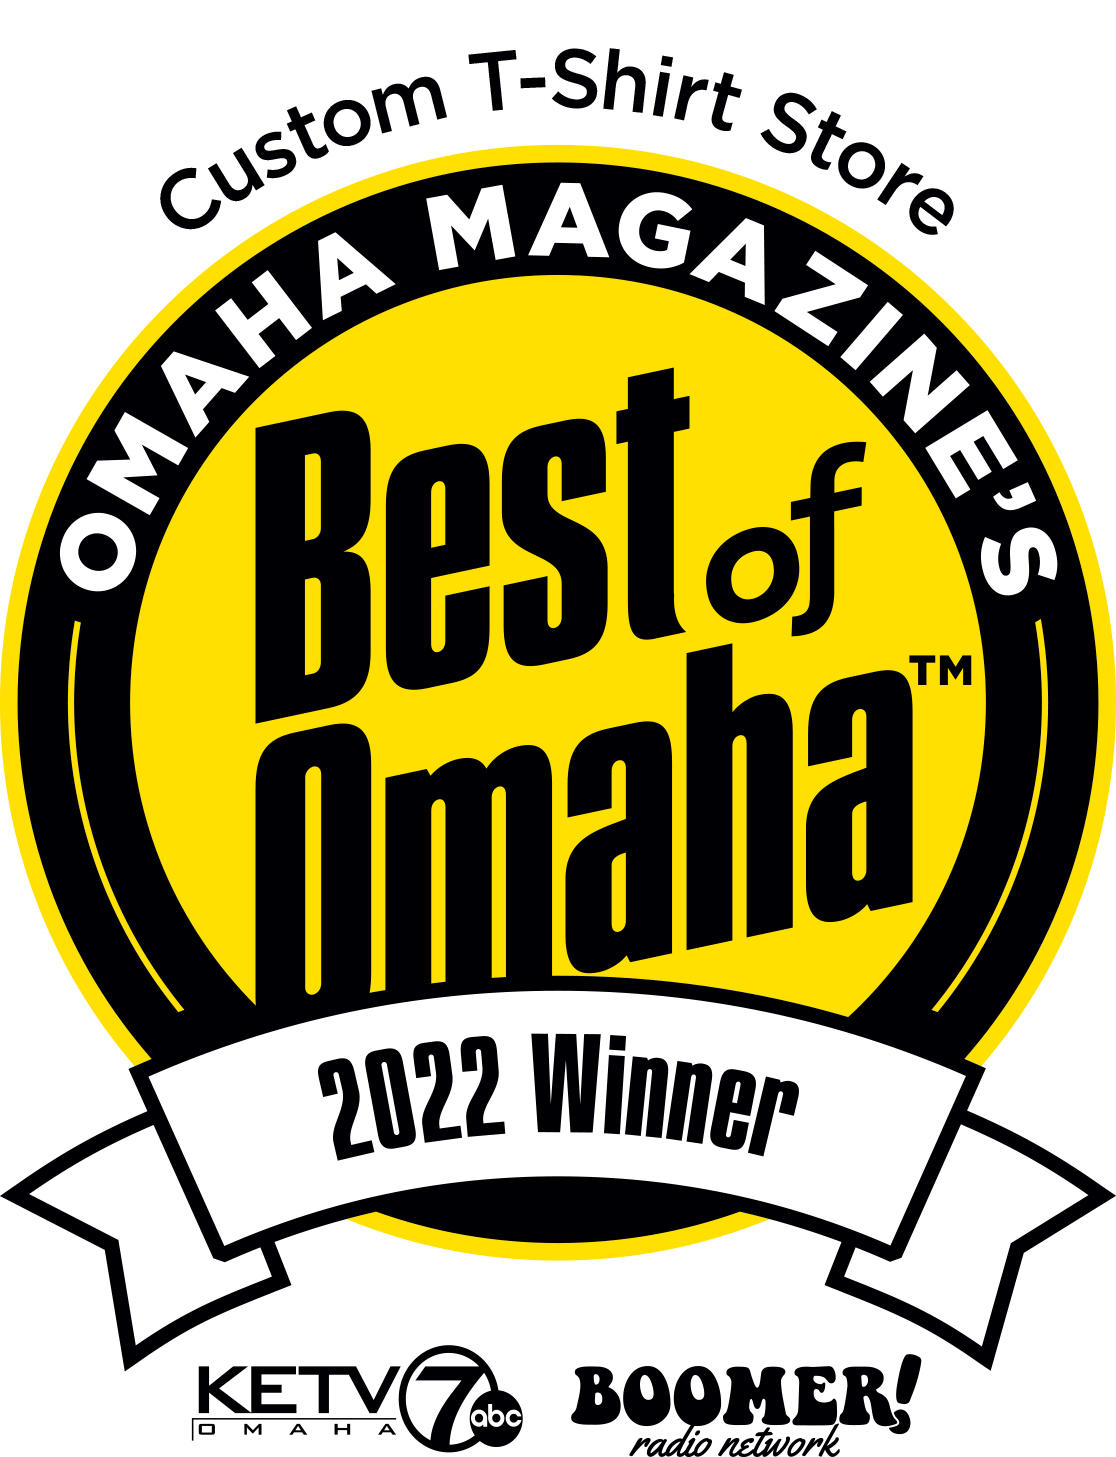 2022 Best of Omaha Winner for for custom t-shirts - Corporate Creations